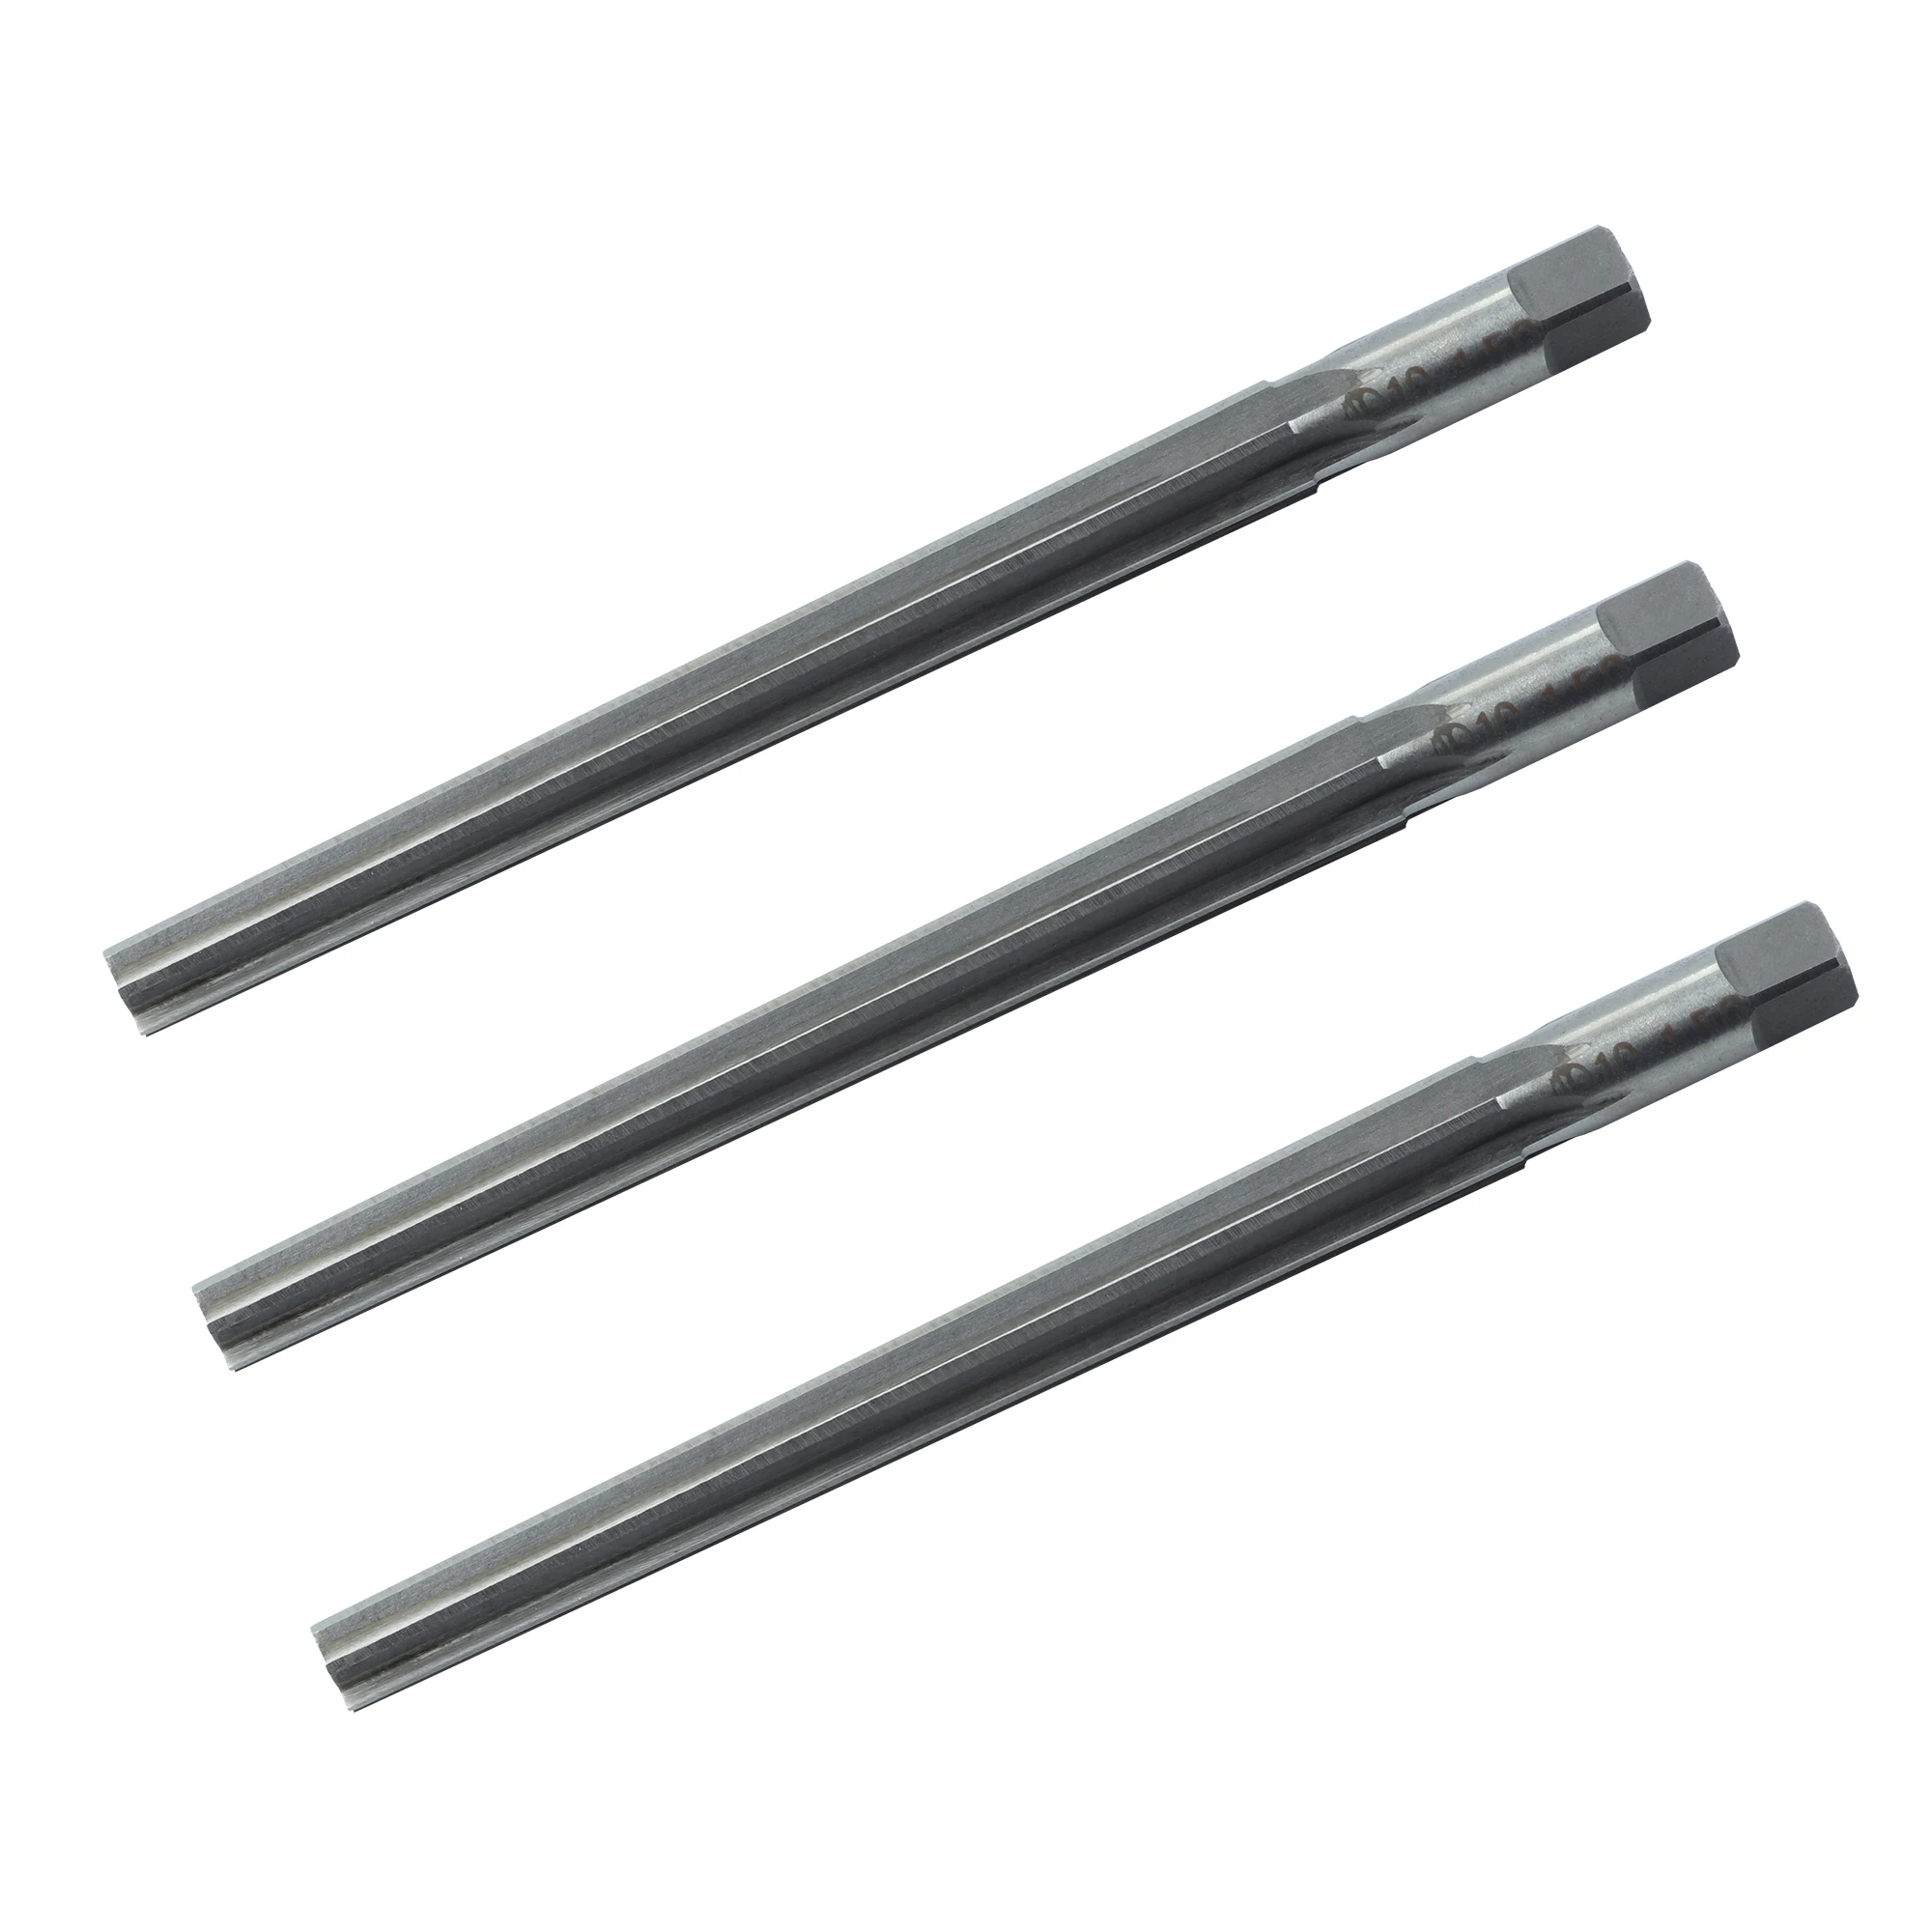 

Taper Pin Hand Reamer 1:50 Conical Degree Sharp Manual Pin 9SiCr Alloy Steel Blade Taper Shank Hand Reamer CNC Tools